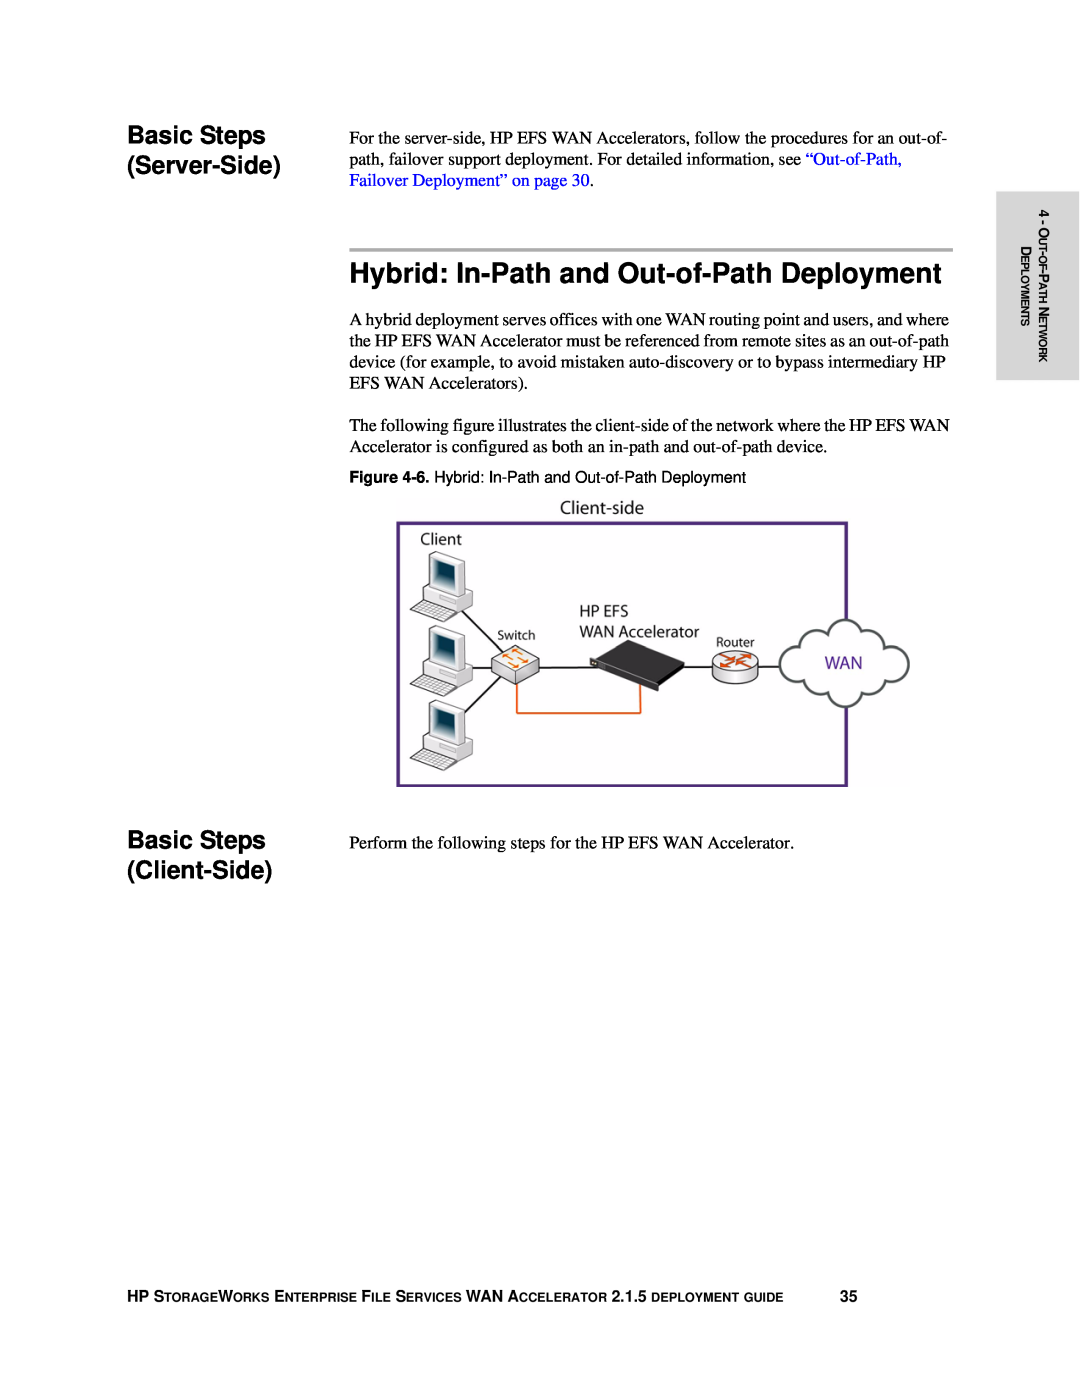 HP Enterprise File Services WAN Accelerator manual Hybrid In-Path and Out-of-Path Deployment, Basic Steps, Server-Side 